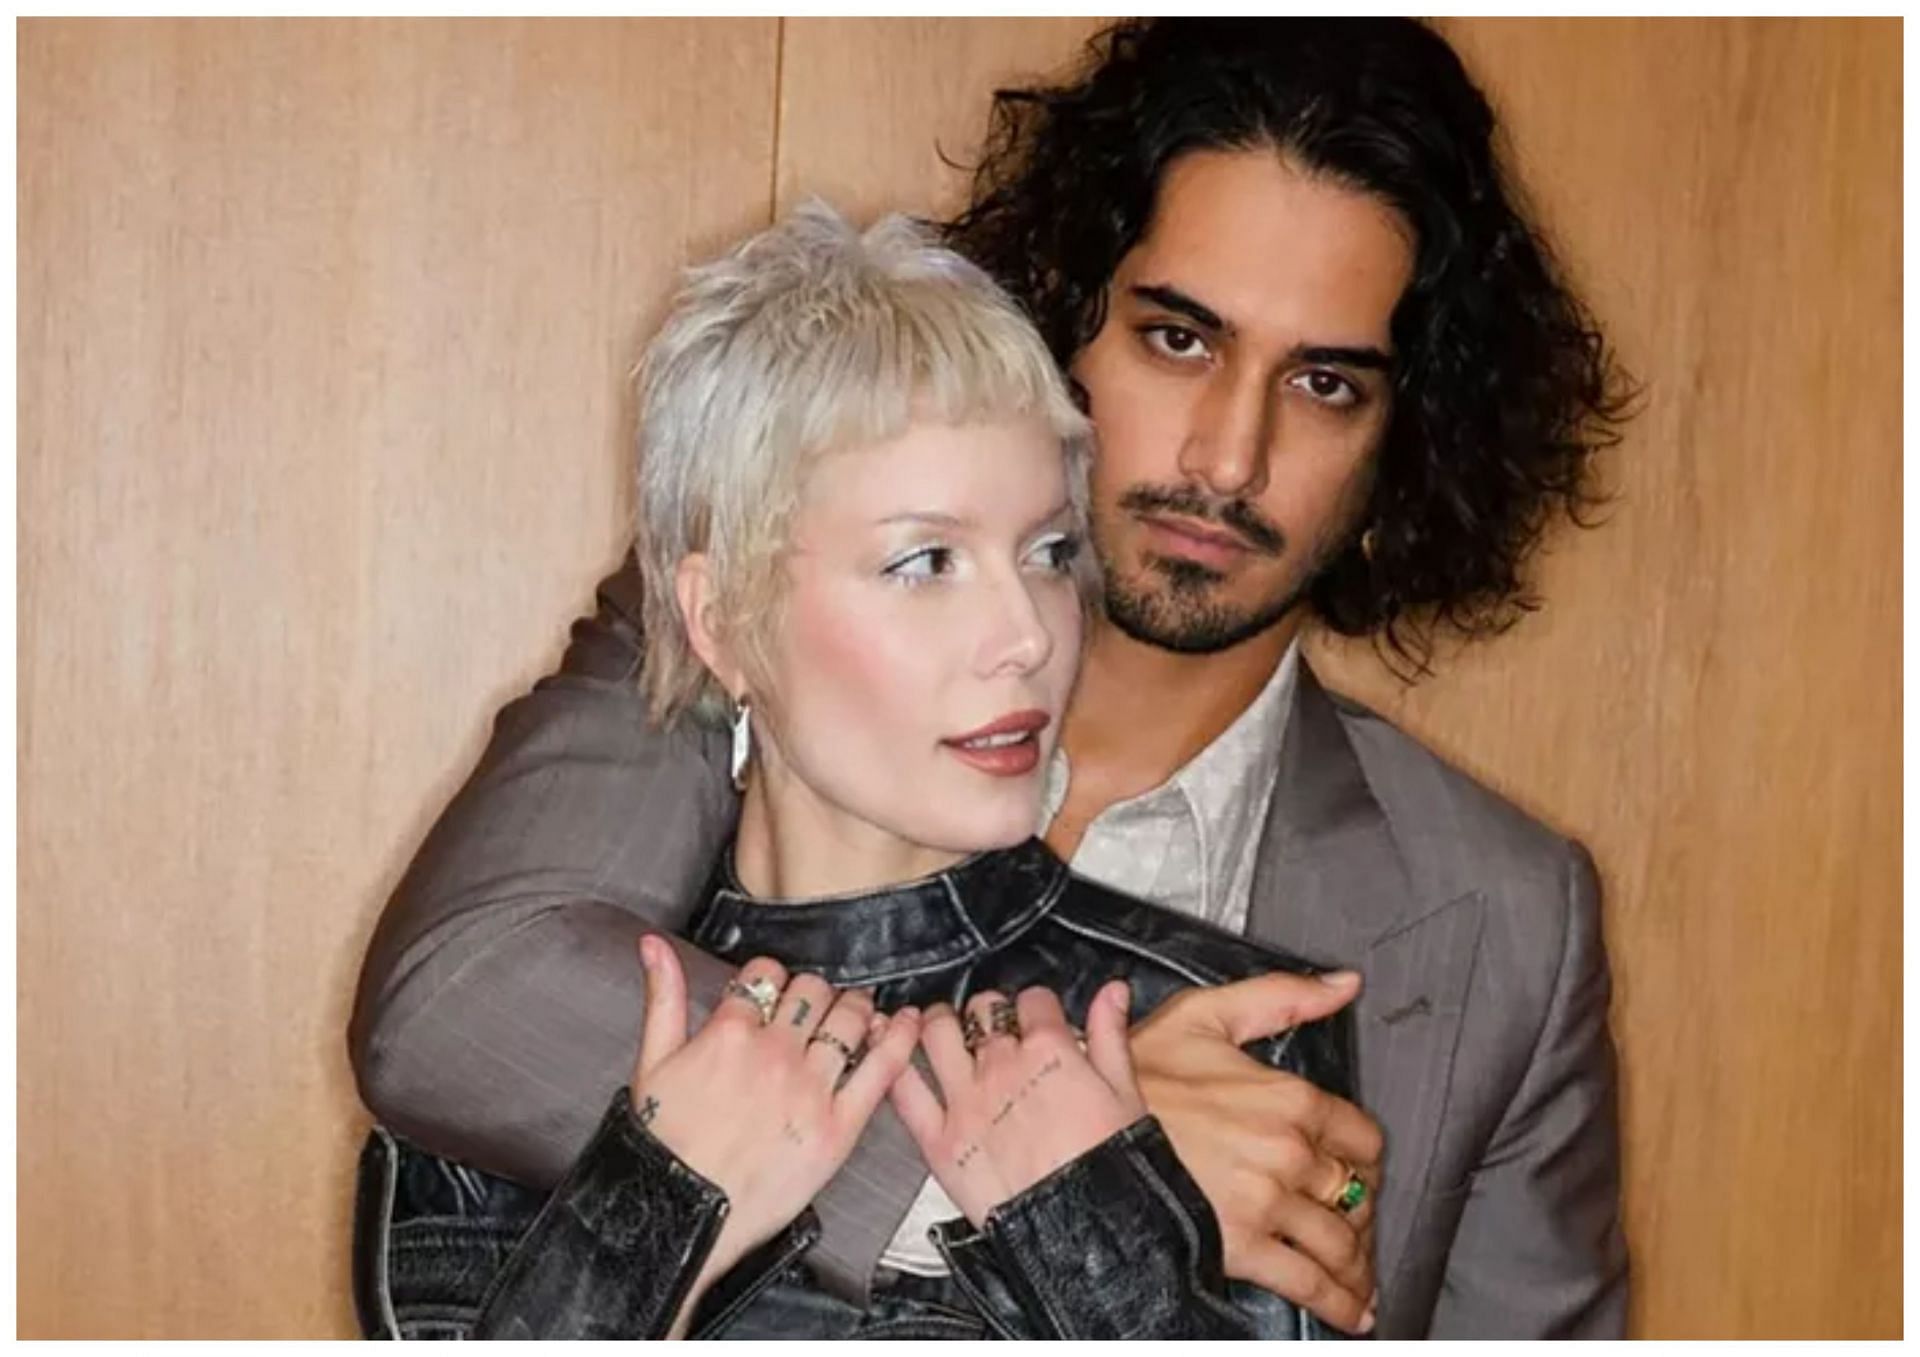 Famous singer Halsey and her boyfriend Avan Jogia were in attendance on Friday